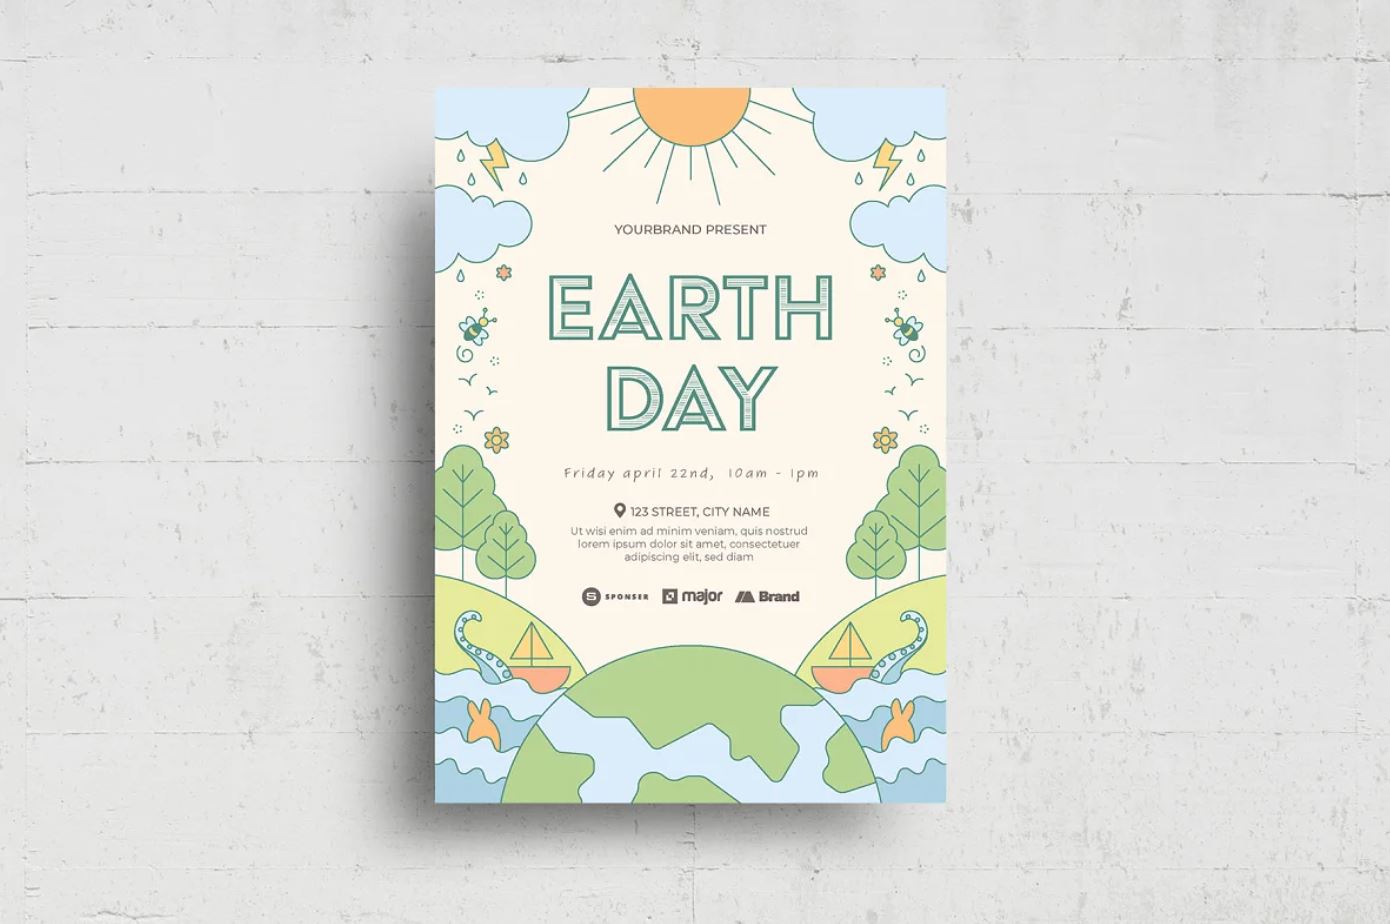 Earth-Day-party-flyer